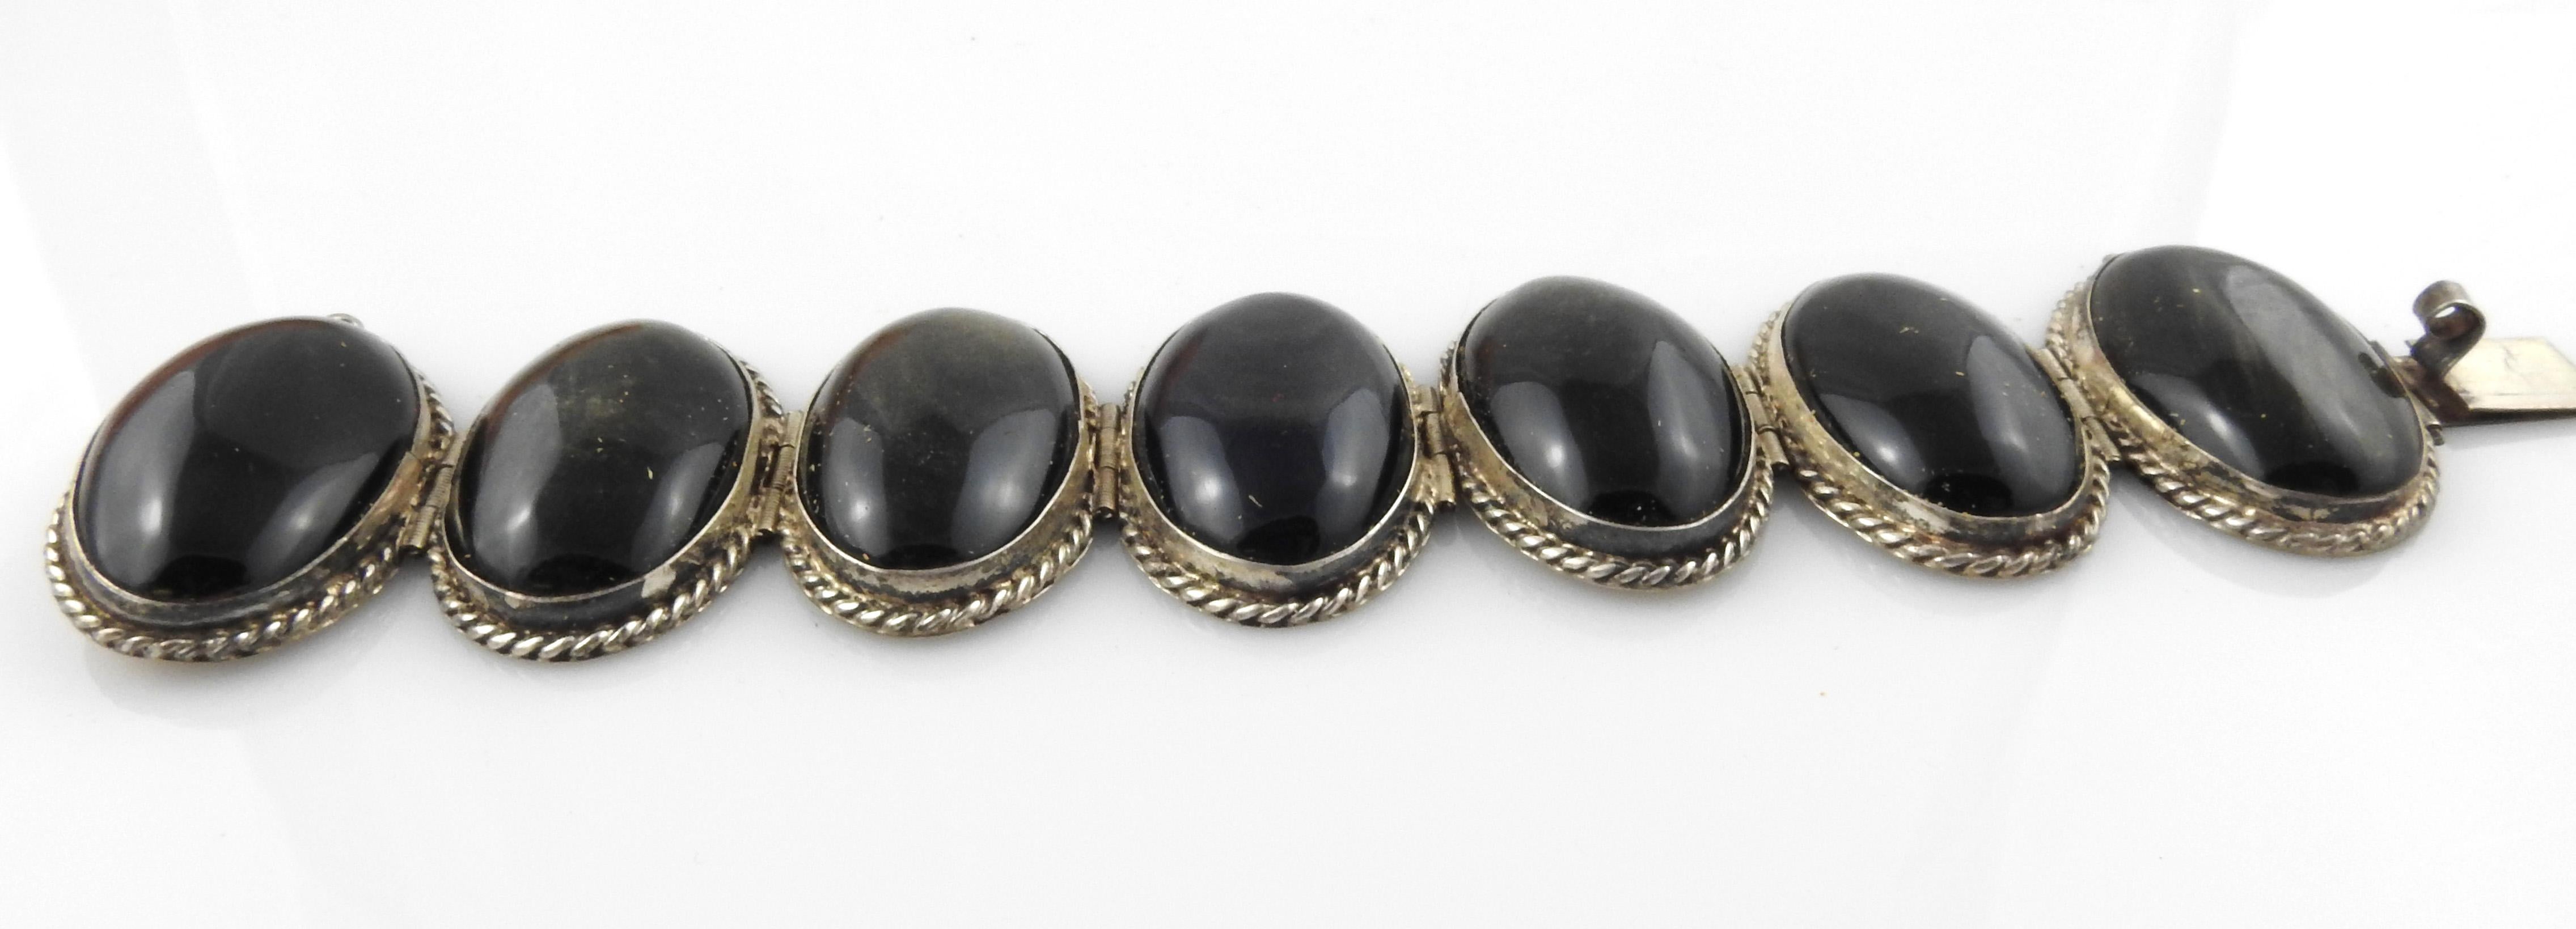 Mexico sterling silver large bezel set obsidian bracelet.

Marking: STERLING 925 MEXICO, MEXICAN(HS?) 925.

Measures approx. 7 3/4